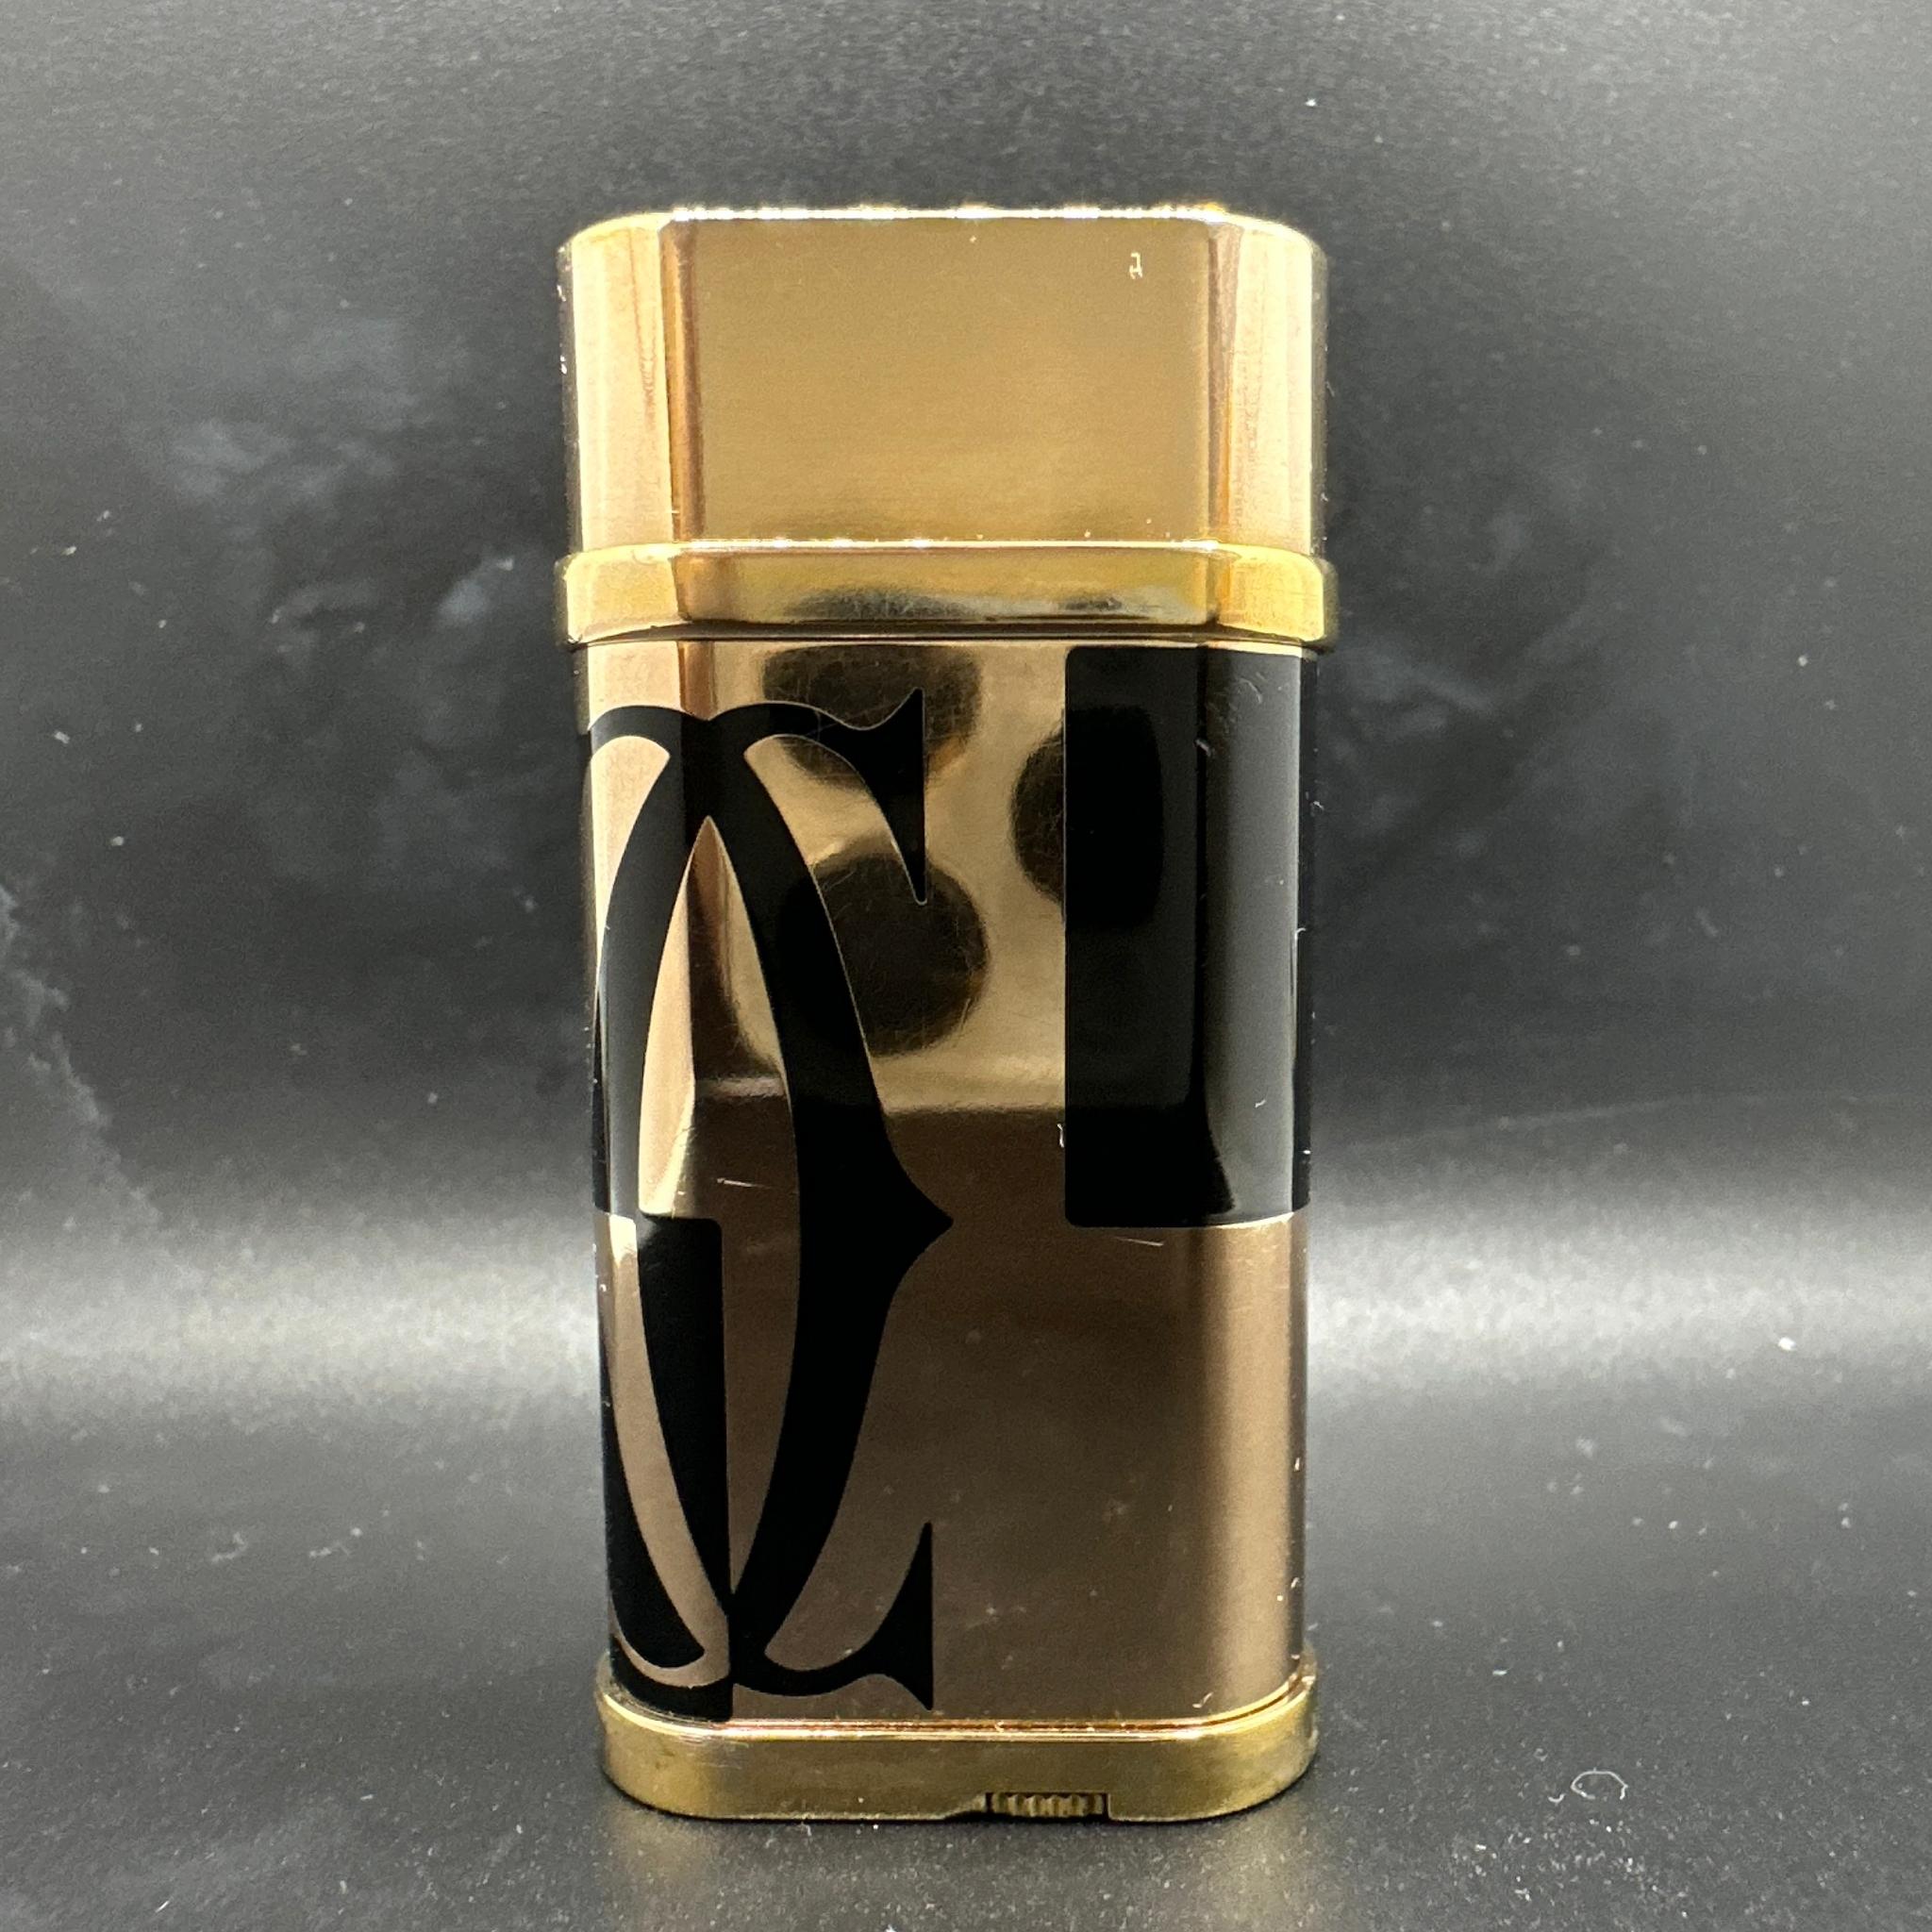 Retro “Le Must the Cartier” Paris Logotype Yellow Gold and Black Lacquer Lighter